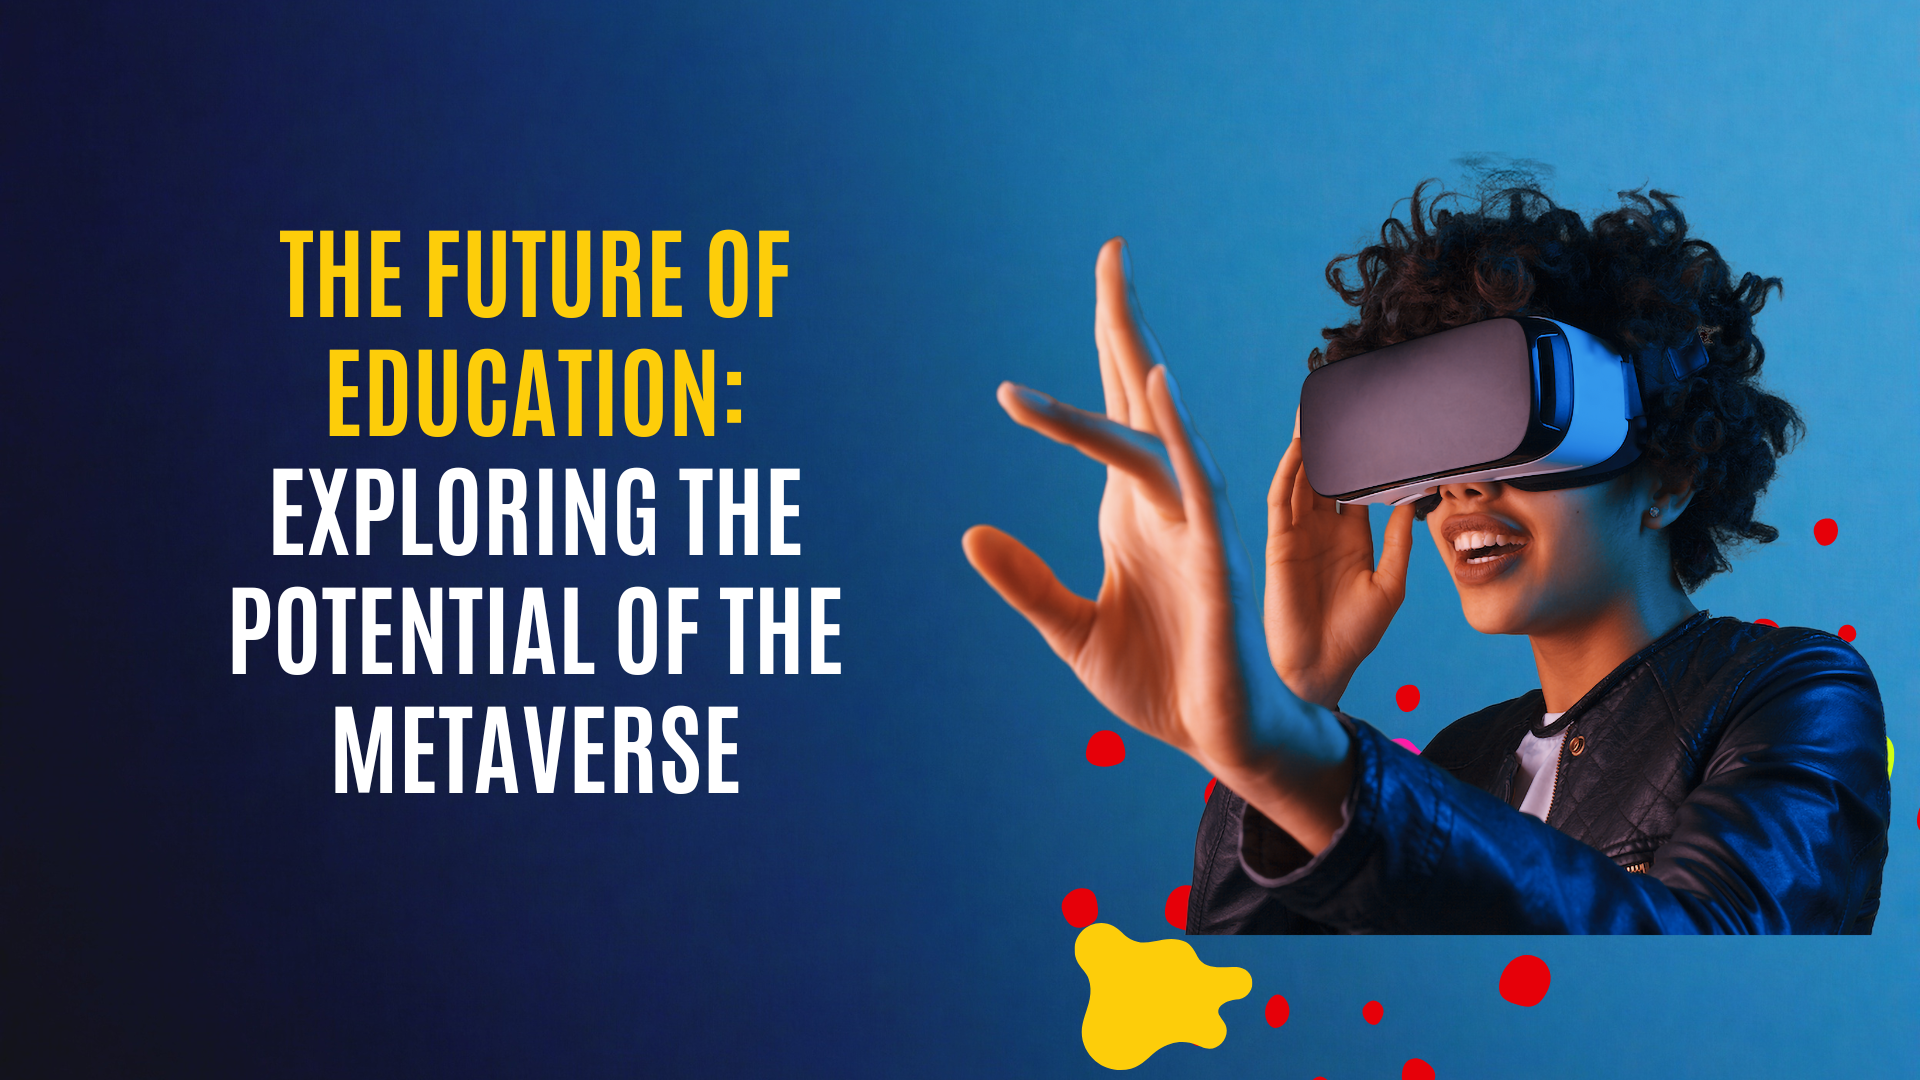 The Future of Education: Exploring the Potential of the Metaverse